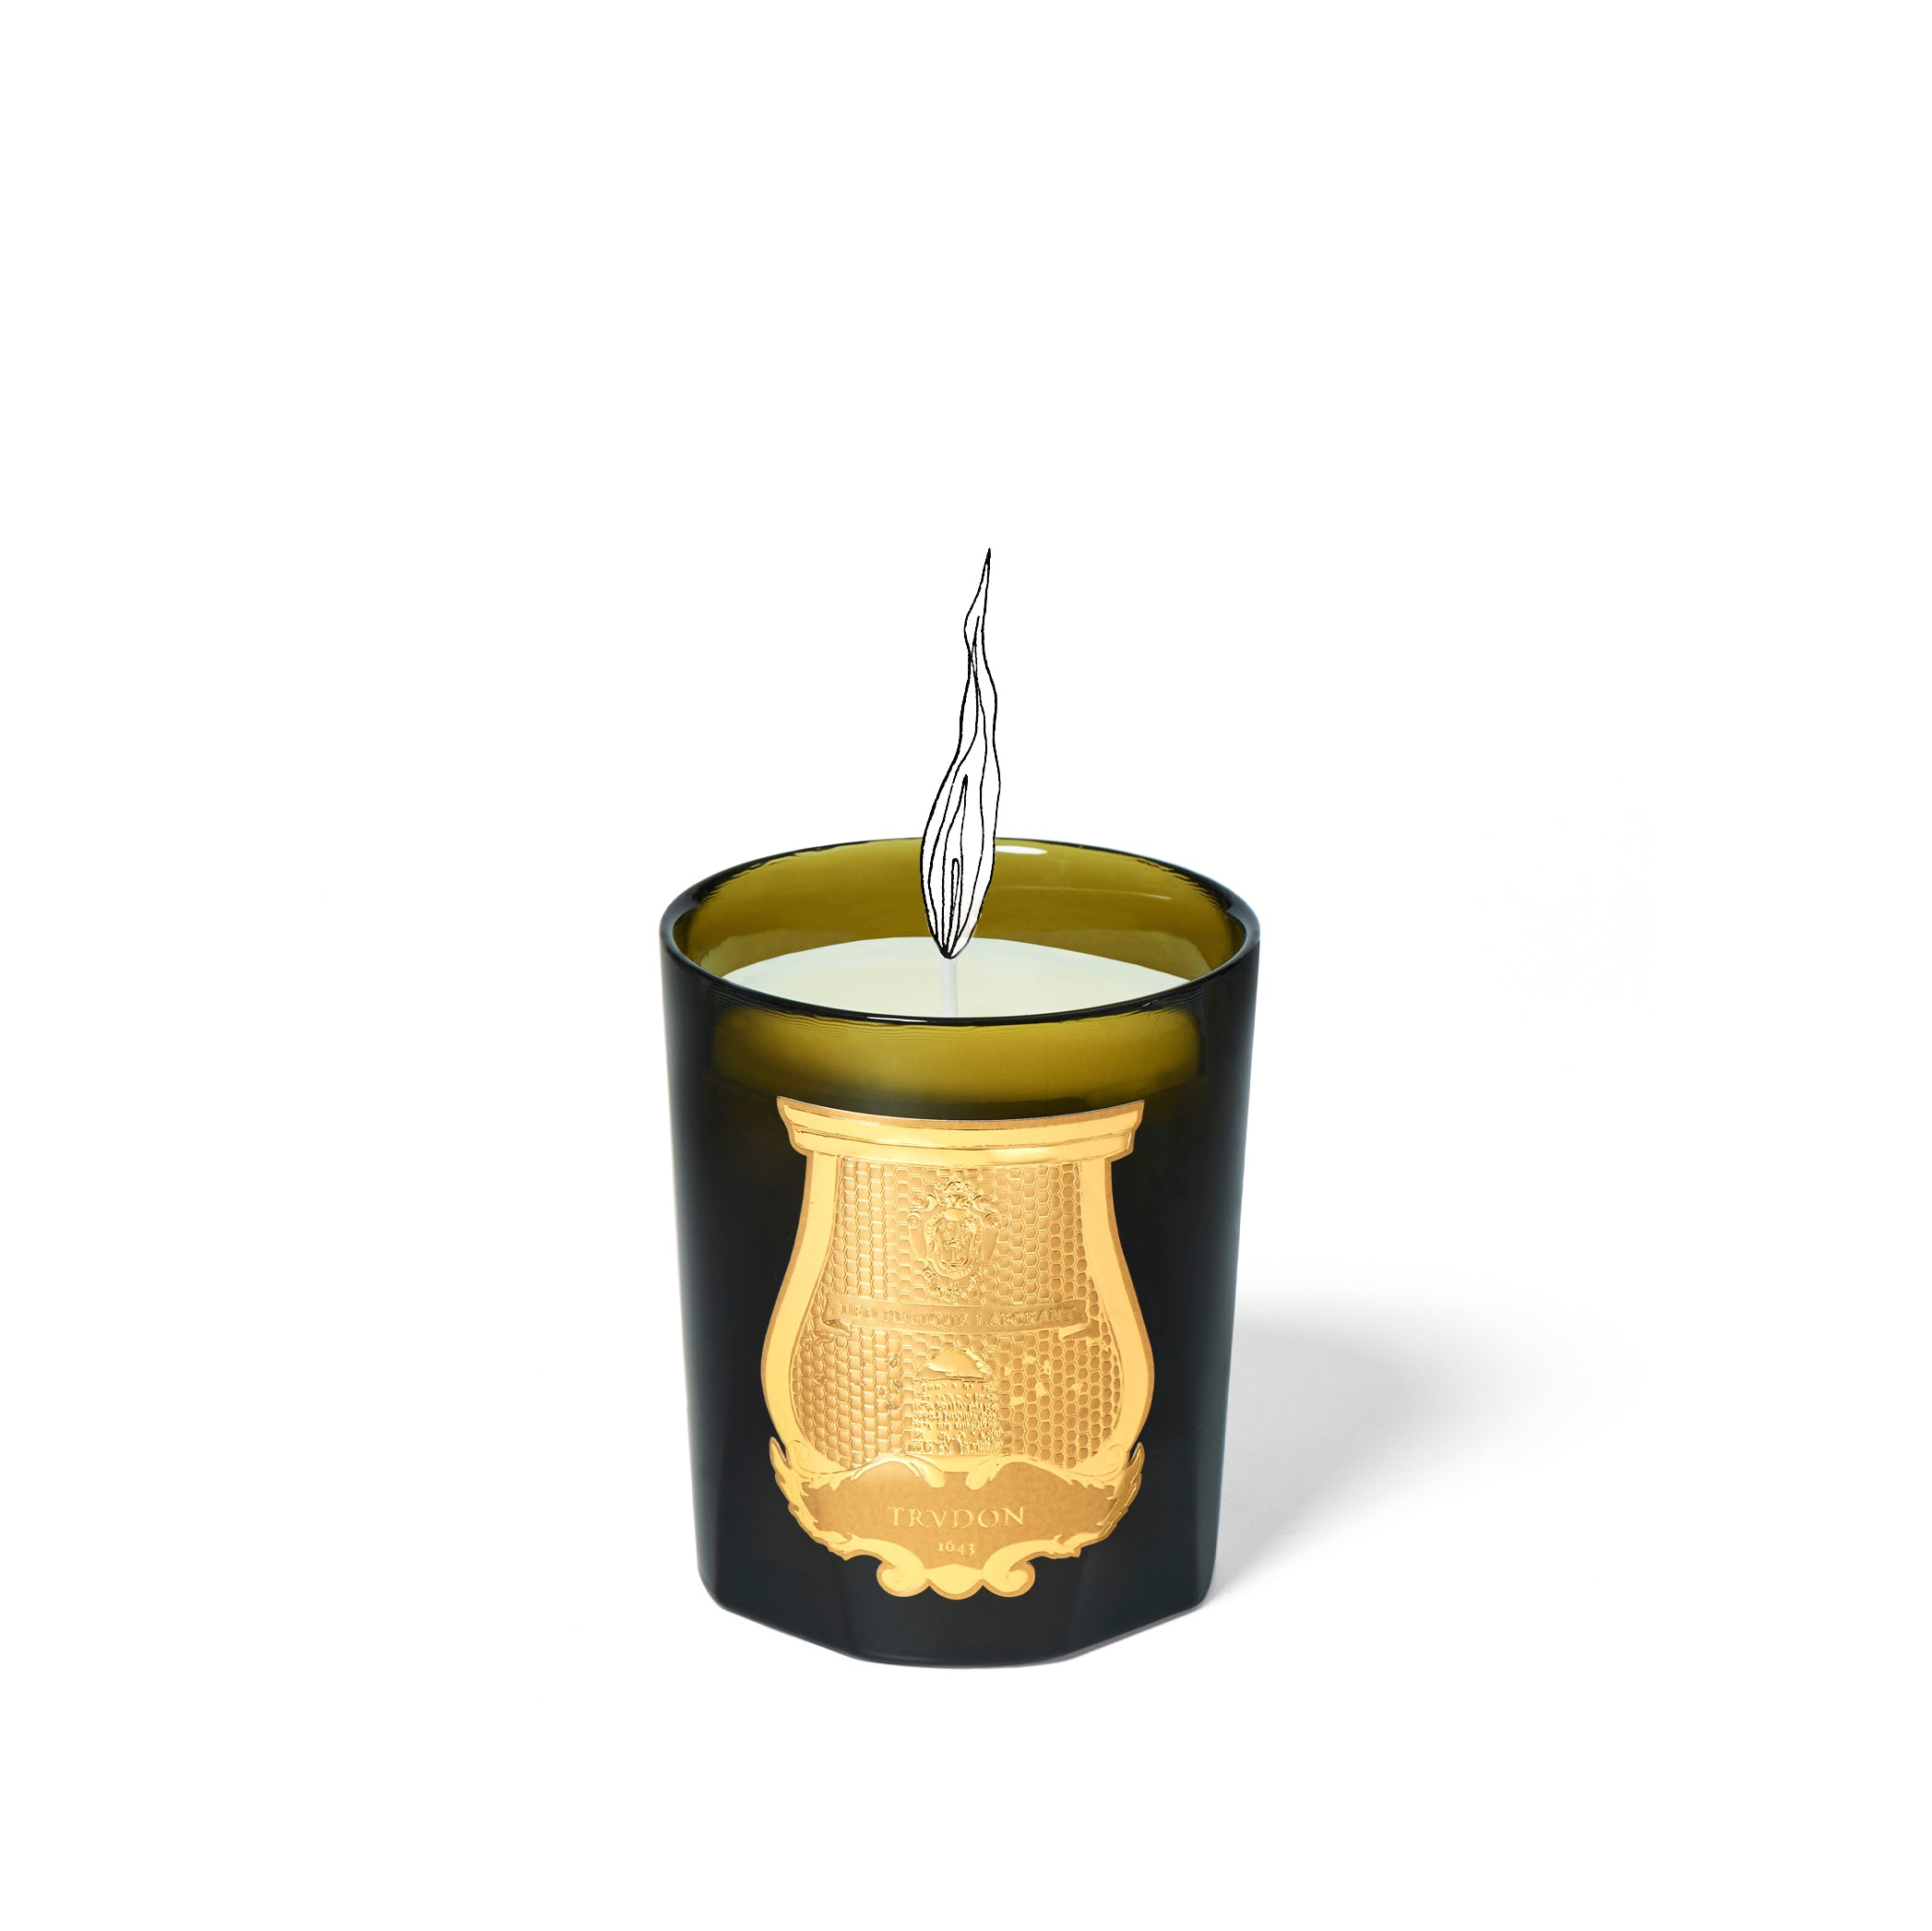 Classic Candle 'Josephine' by Trudon, 270g